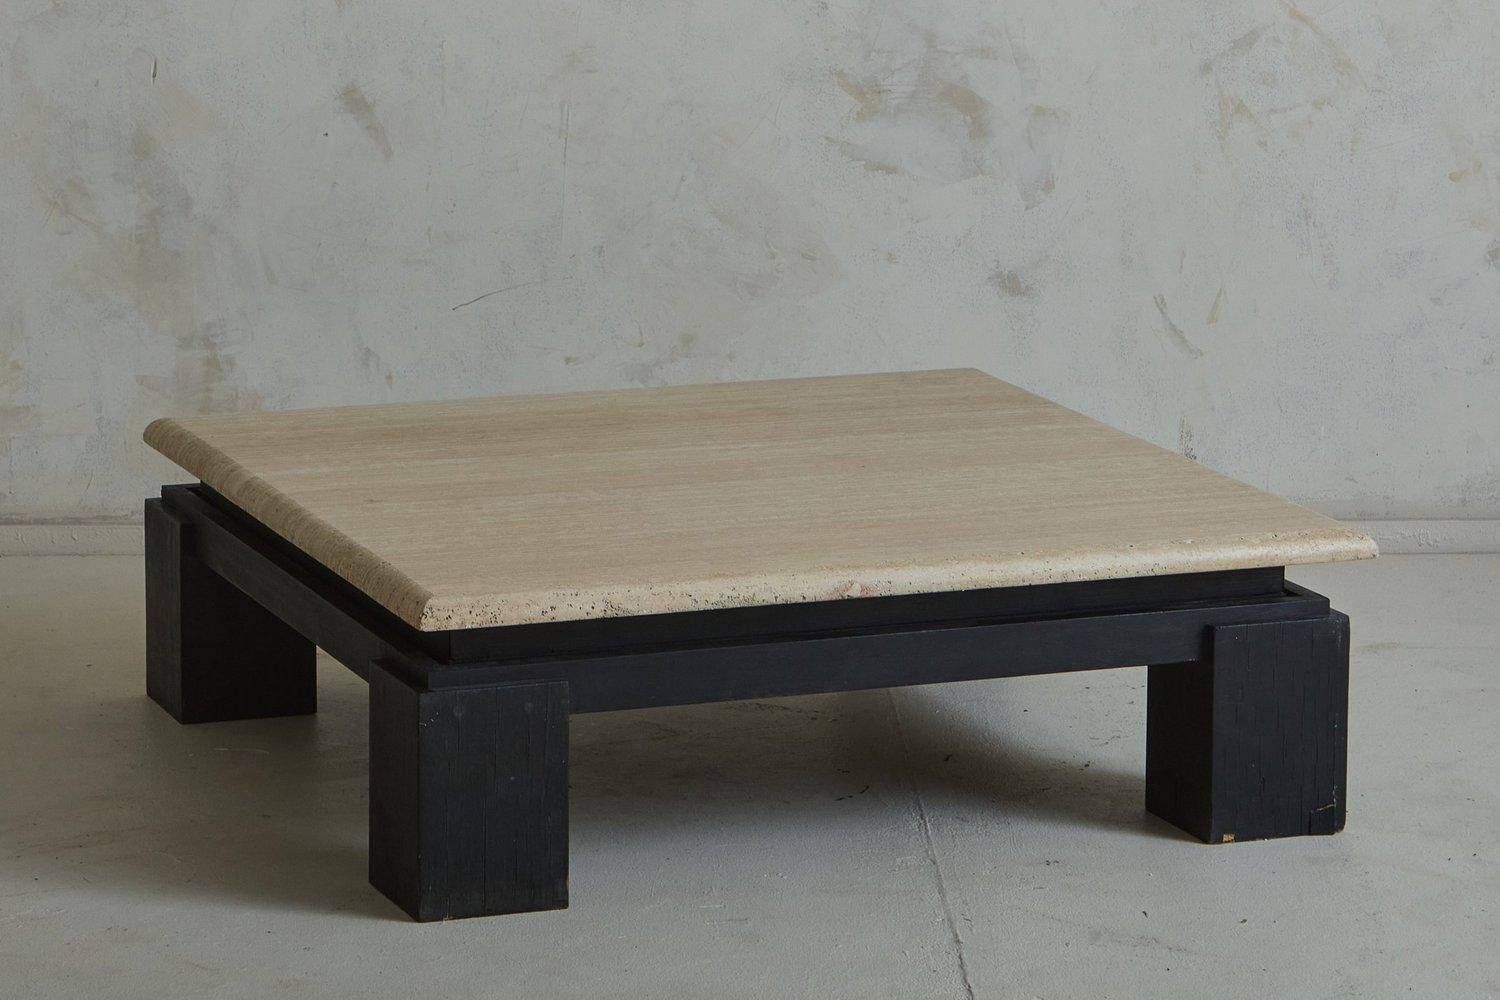 A vintage French coffee table featuring a handsome black painted wood base with block legs. This piece has a square travertine table top with beautiful veining and a beveled edge, which appears to float above the base. Sourced in France, 20th